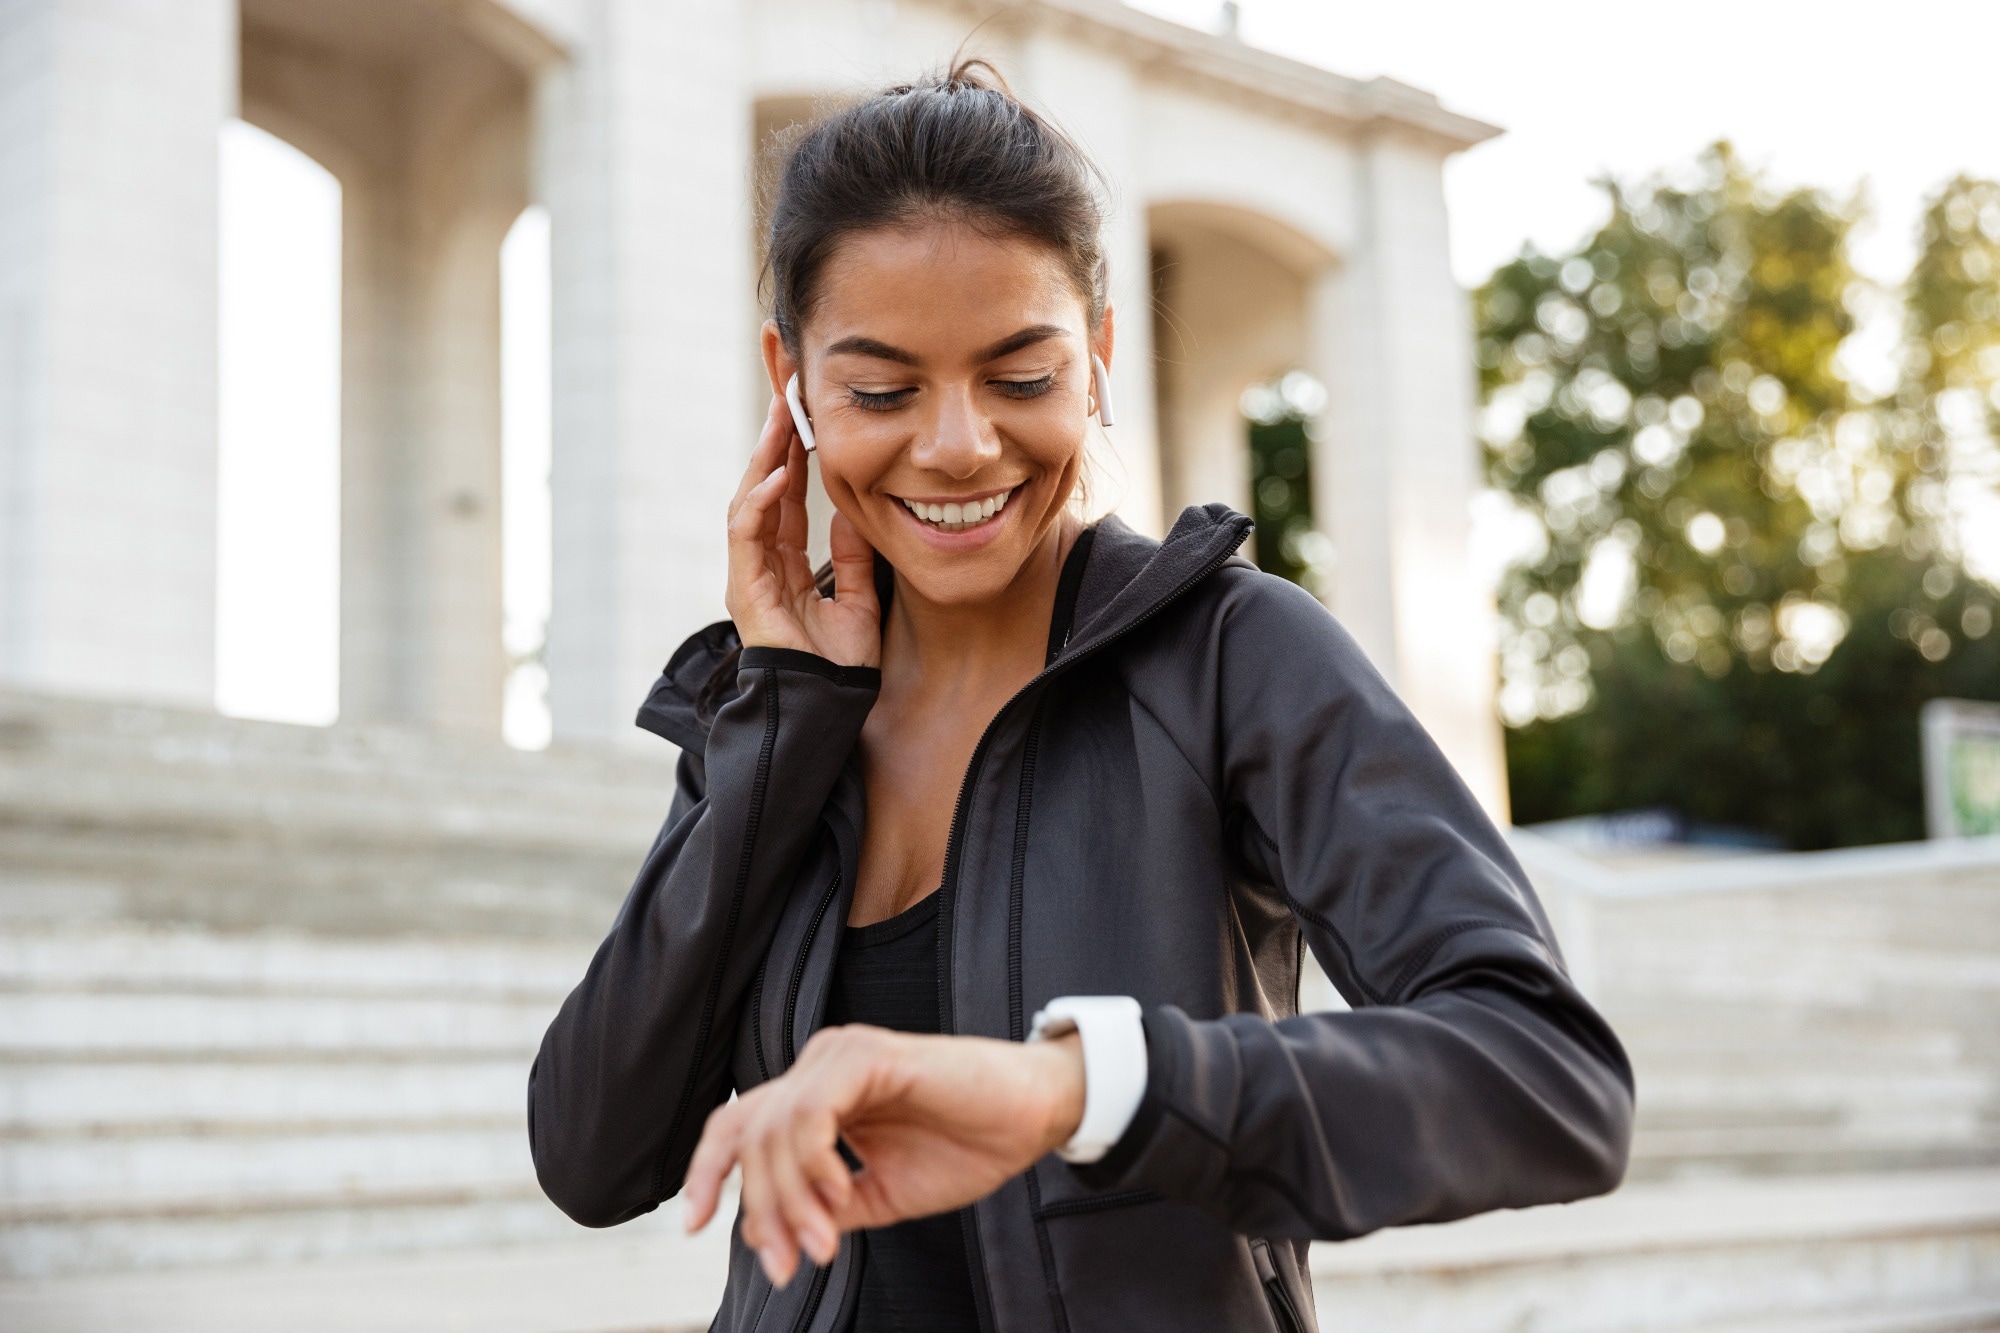 Study: Challenges and recommendations for wearable devices in digital health: Data quality, interoperability, health equity, fairness. Image Credit: Dean Drobot/Shutterstock